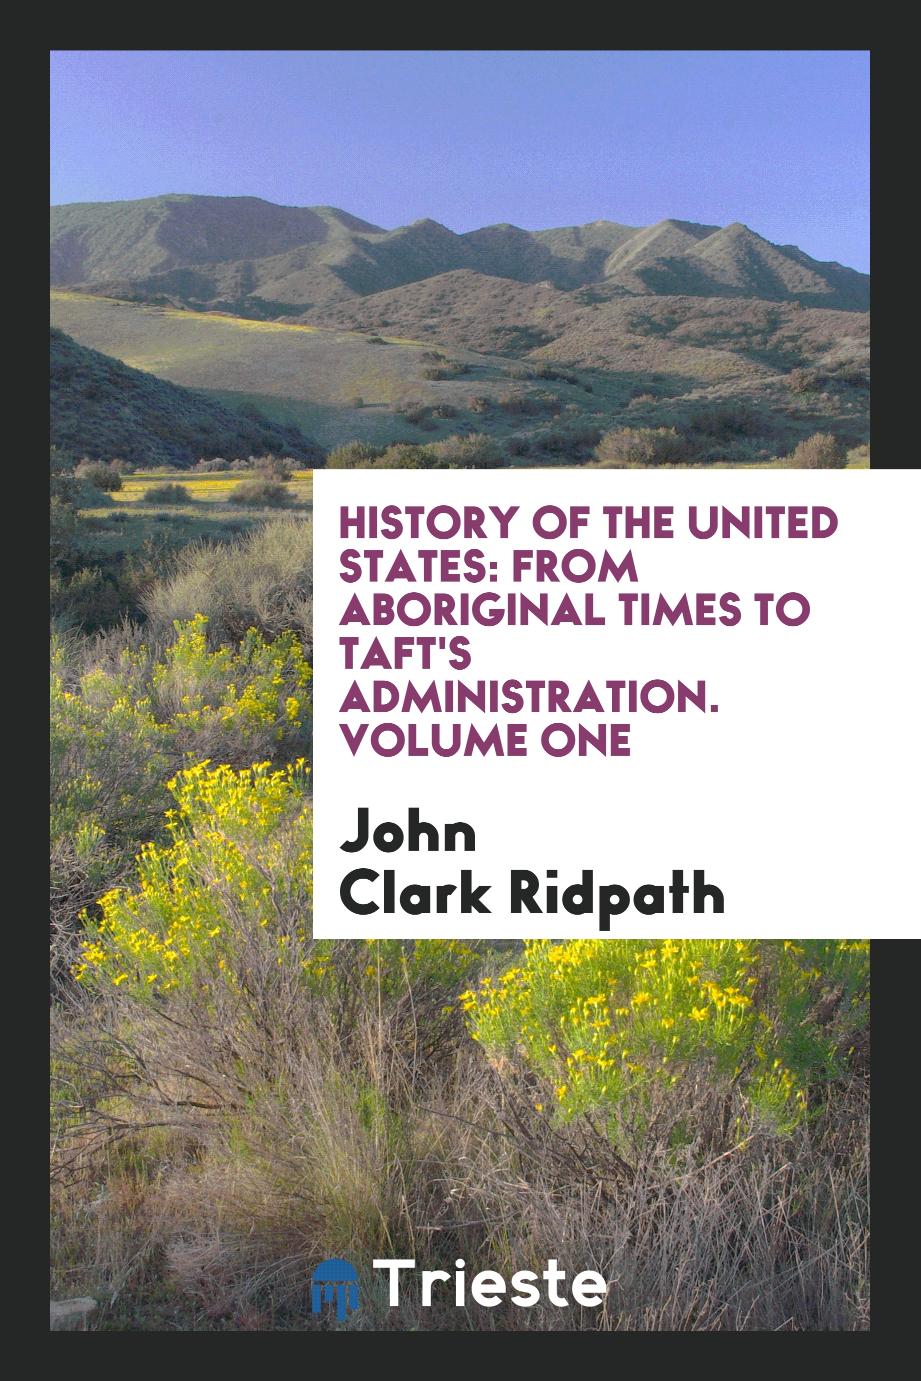 History of the United States: From Aboriginal Times to Taft's Administration. Volume One